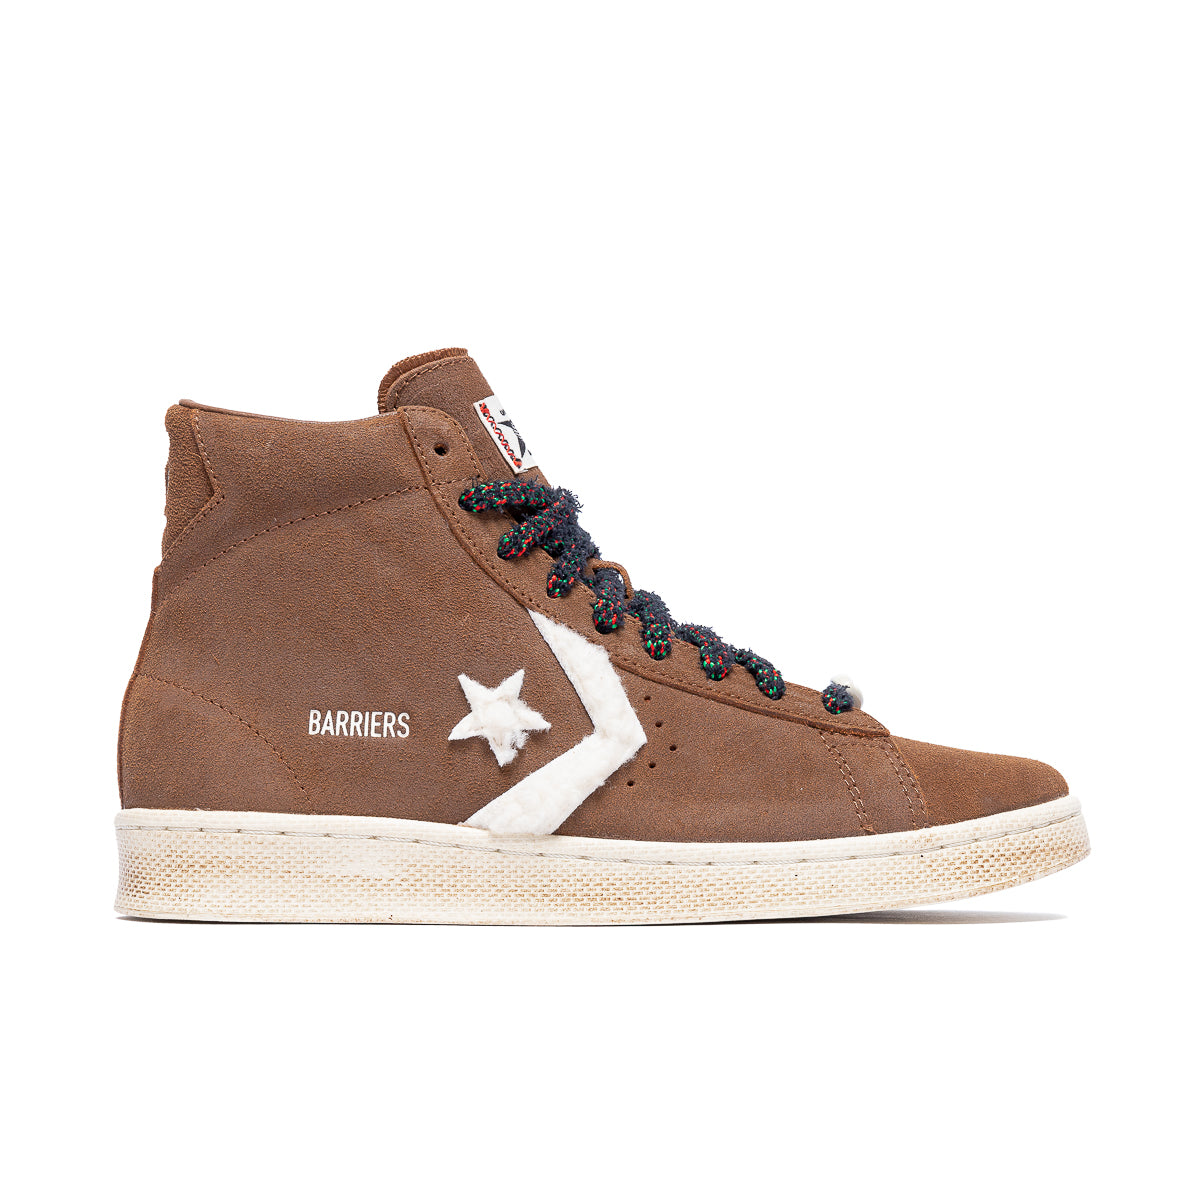 Converse x Barriers Pro Leather Hi 'Monks Robe'